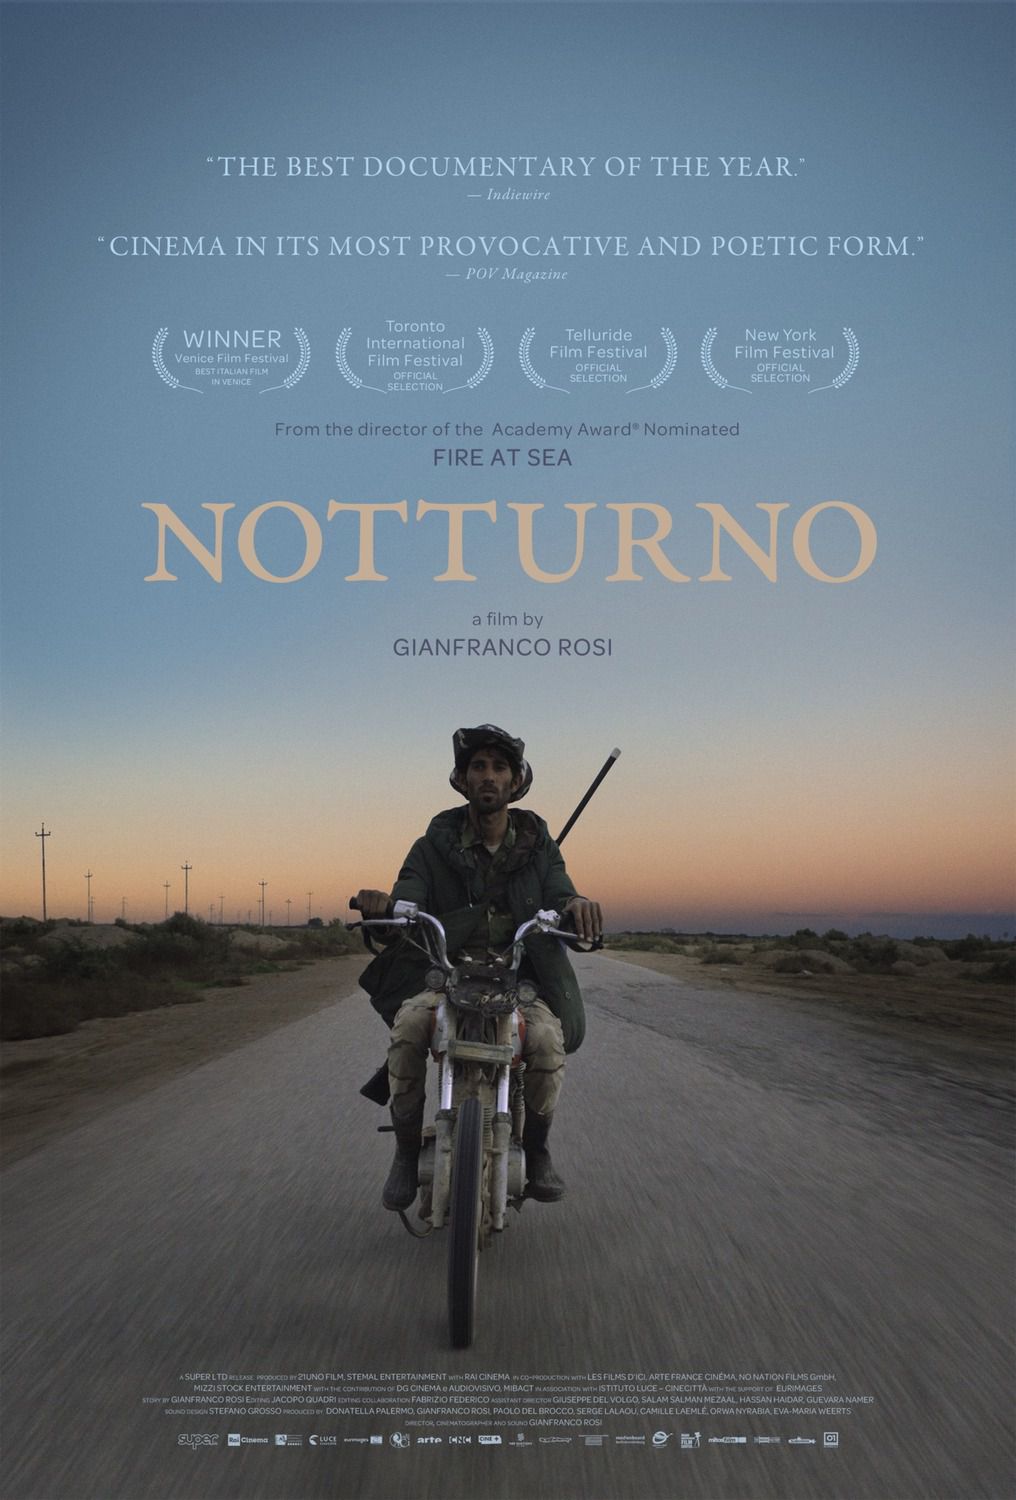 Notturno - Documentaire (2021) streaming VF gratuit complet